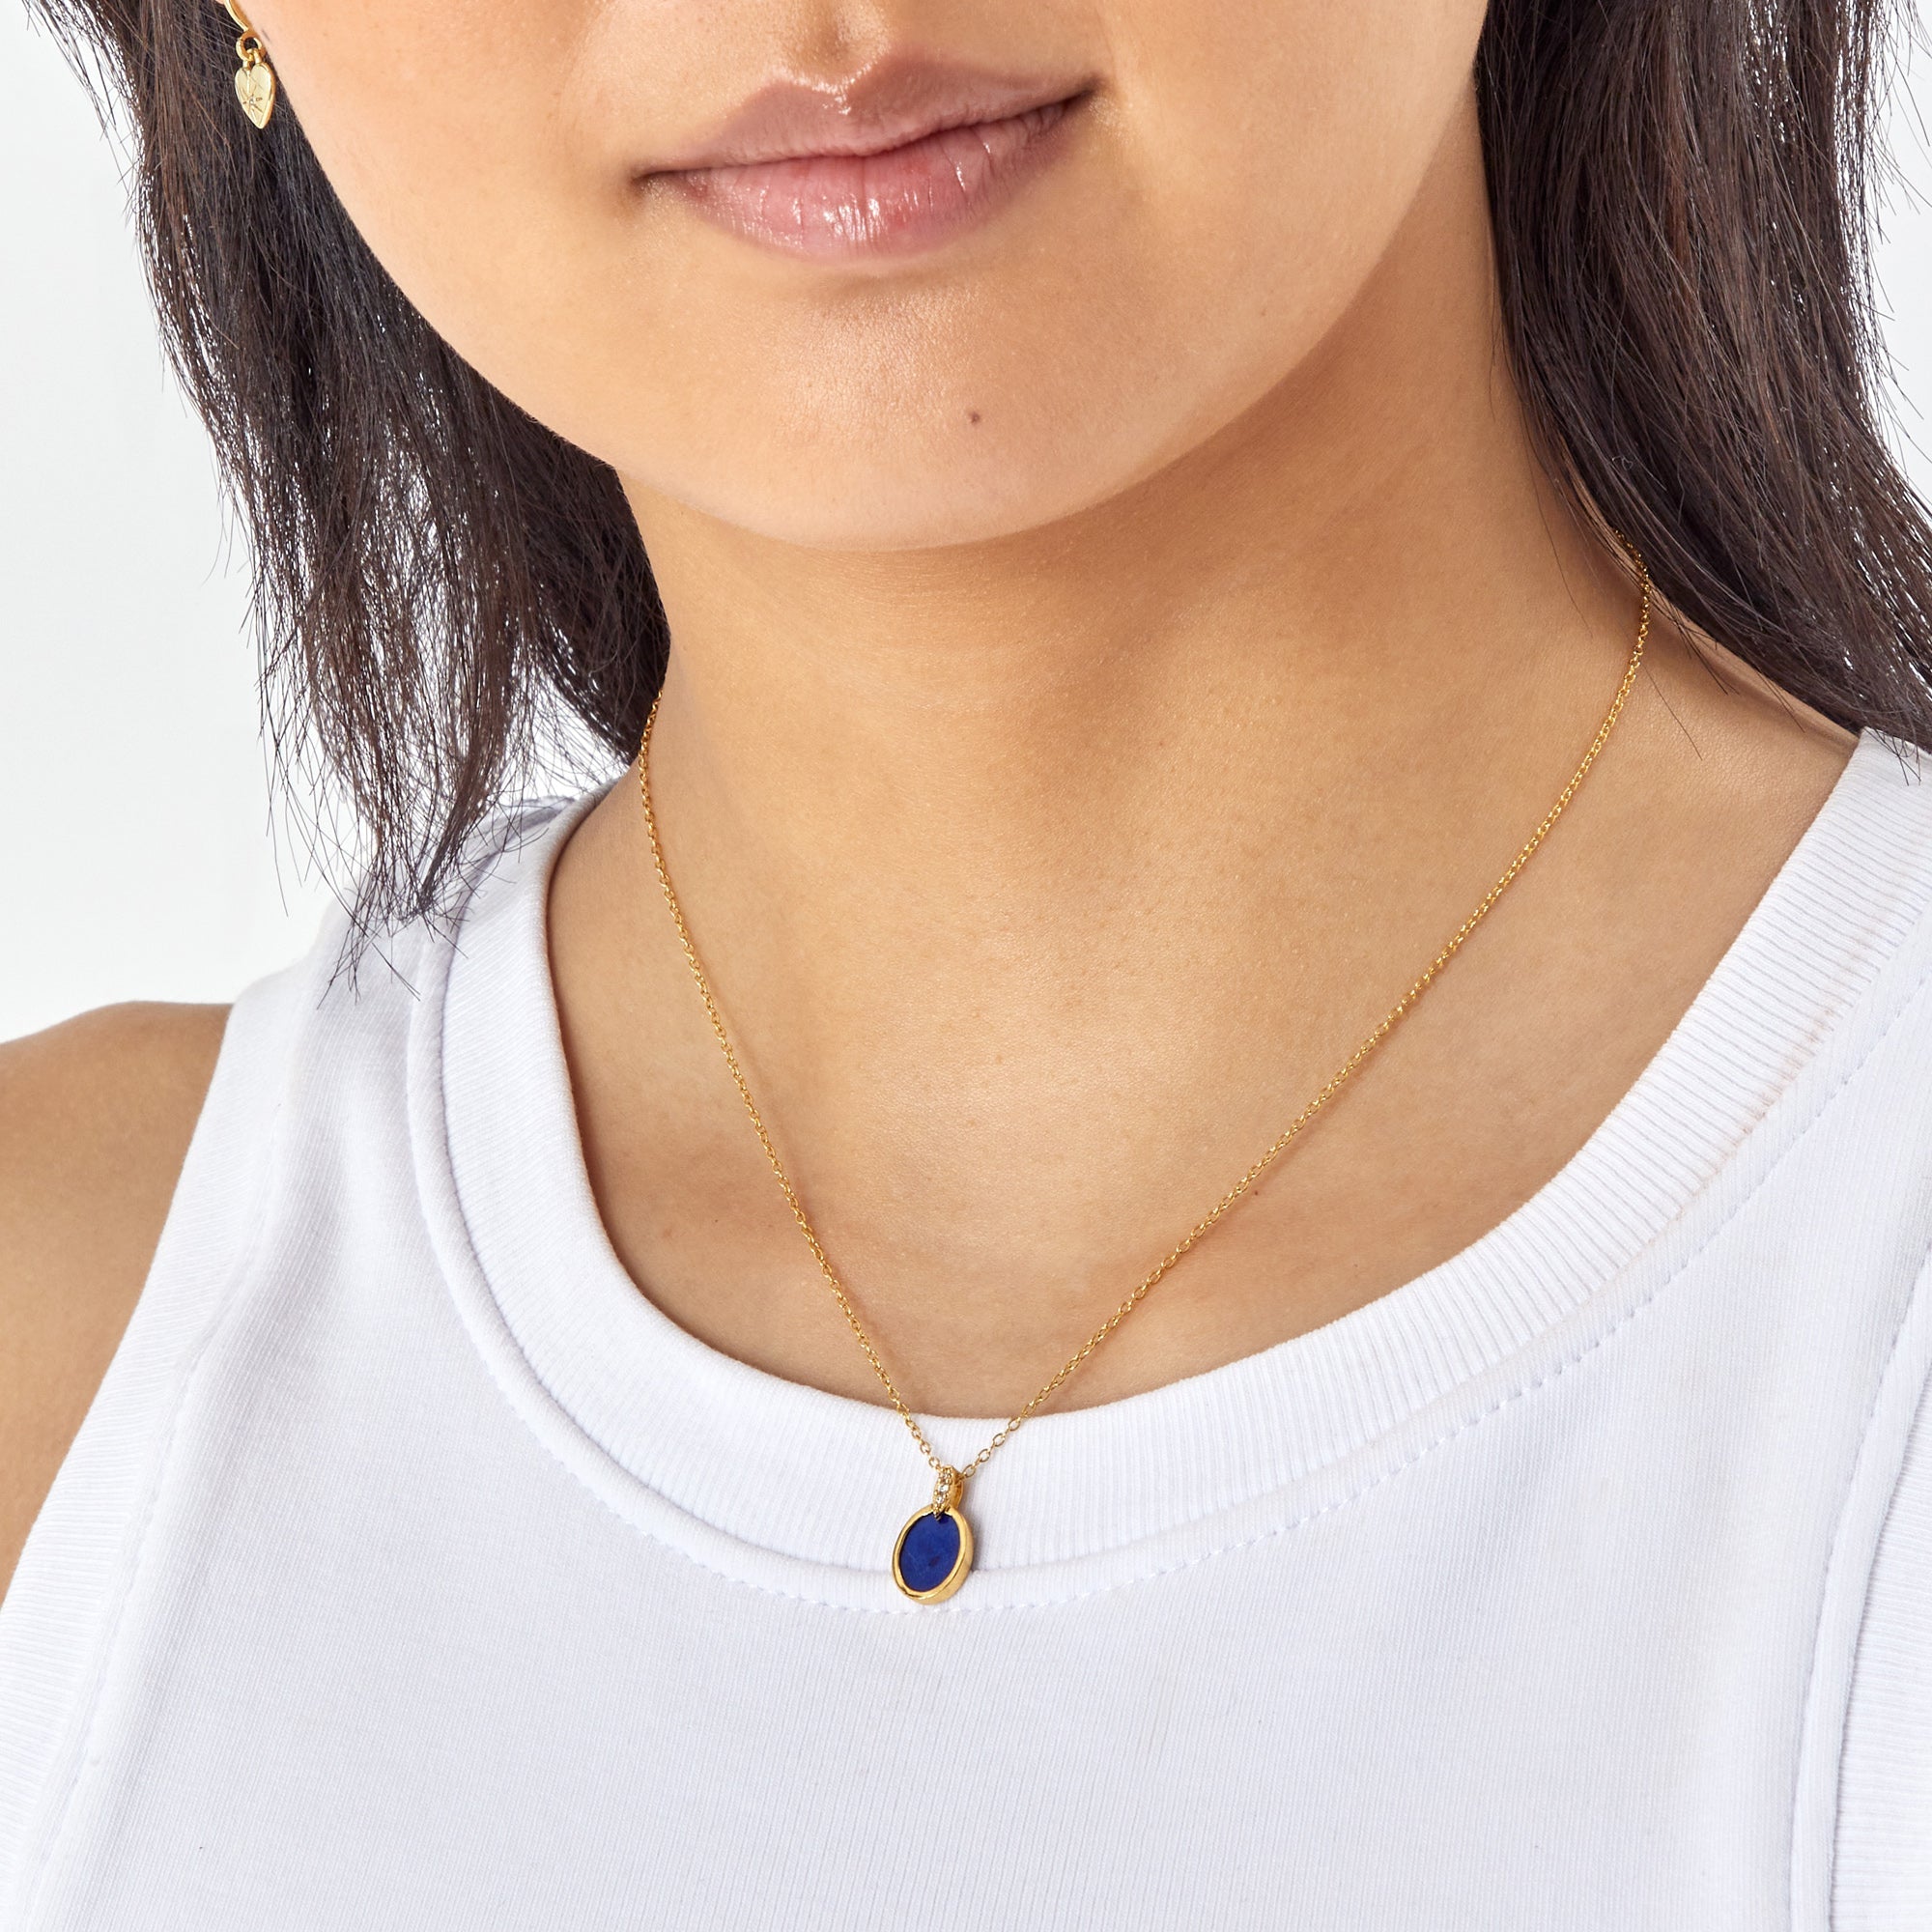 Real Gold Plated Z Healing Stone Lapis Pendant Necklace For Women By Accessorize London